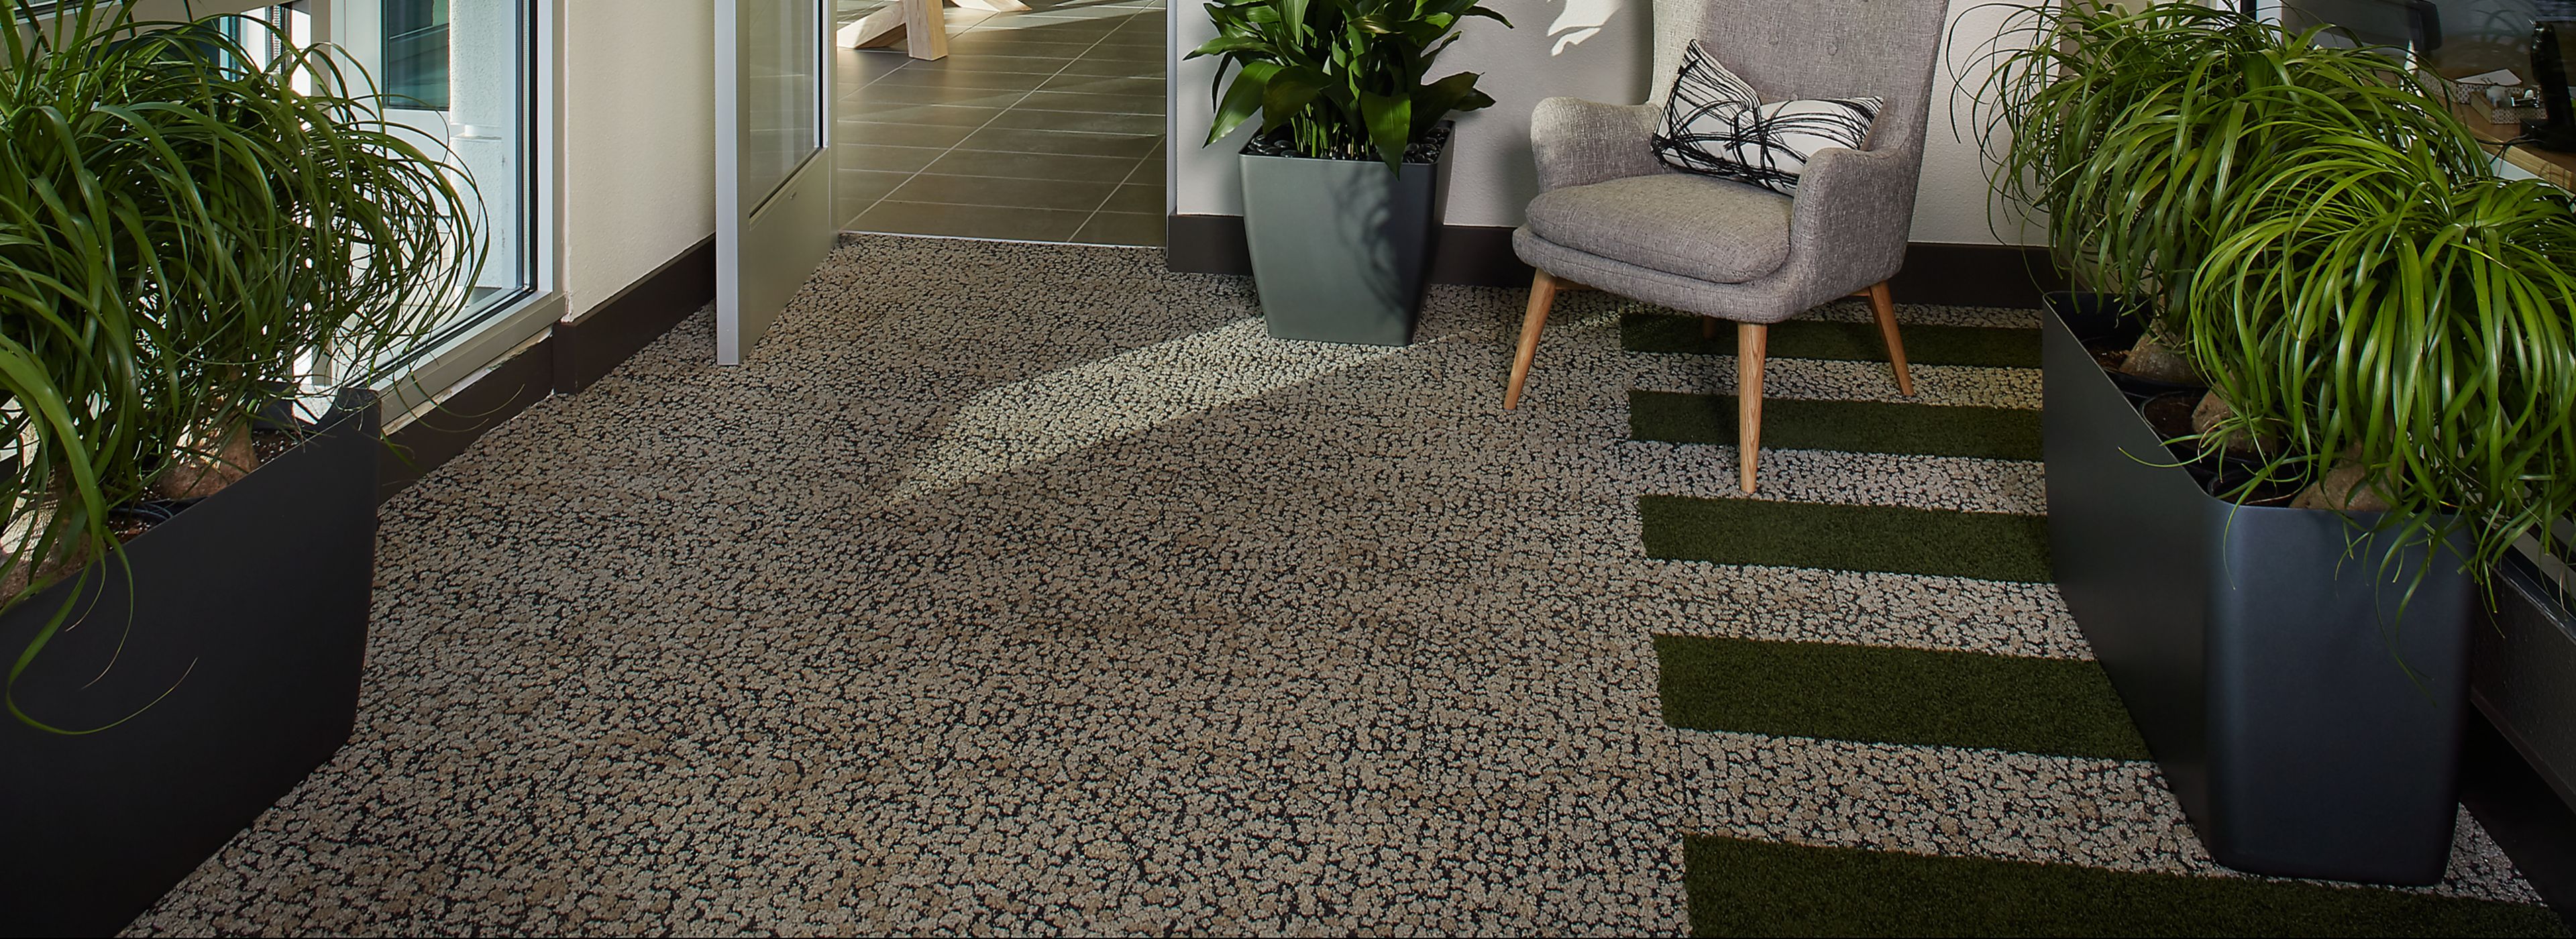 image Interface HN840 plank carpet tile in foyer of Linq Leasing Office numéro 1